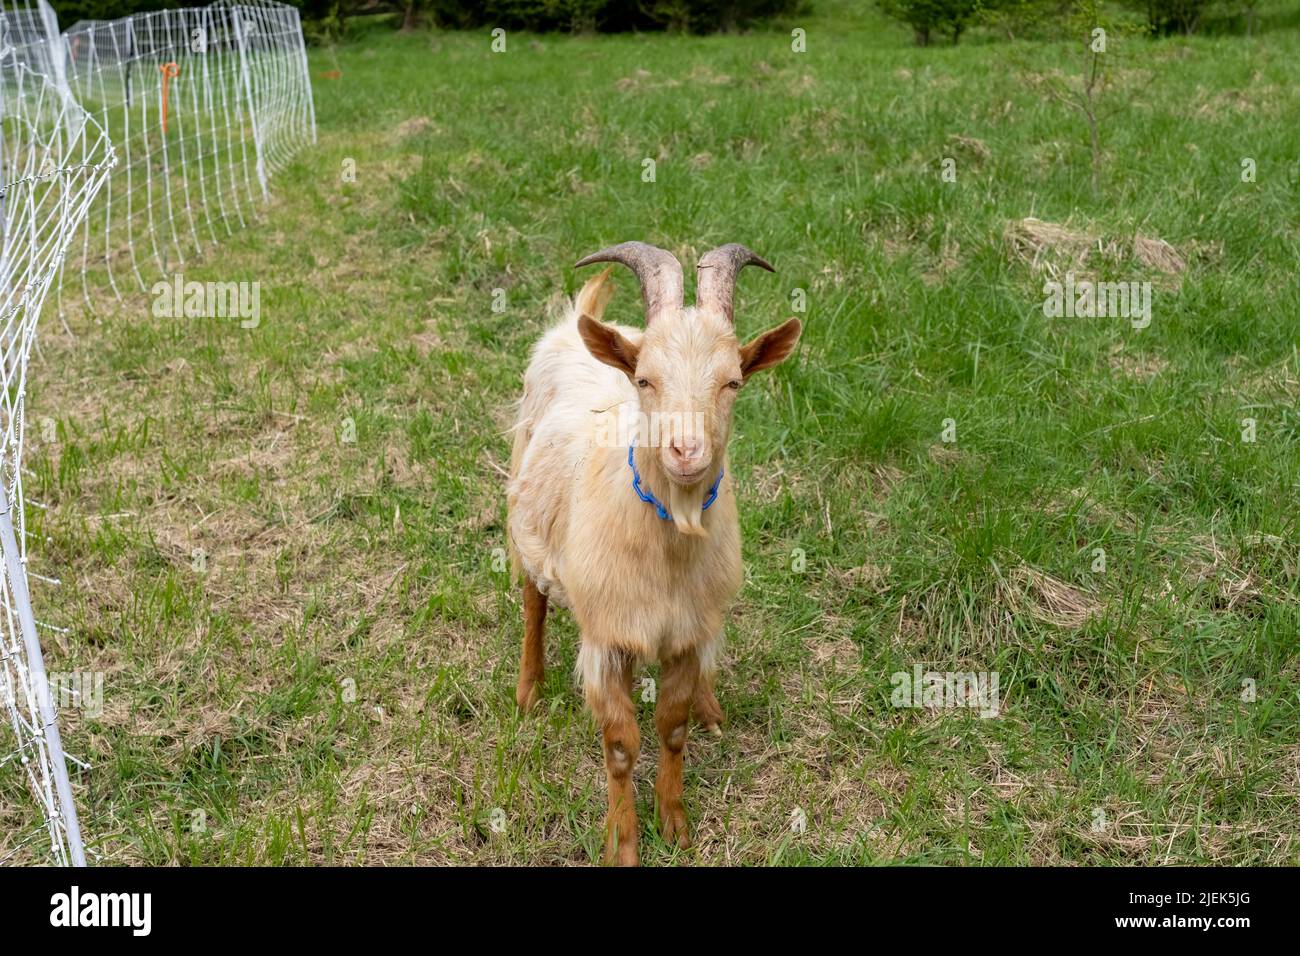 Issaquah, Washington, USA.  A rare heritage breed, Golden Gurnsey young billy goat, walking beside an electrified fence. Stock Photo